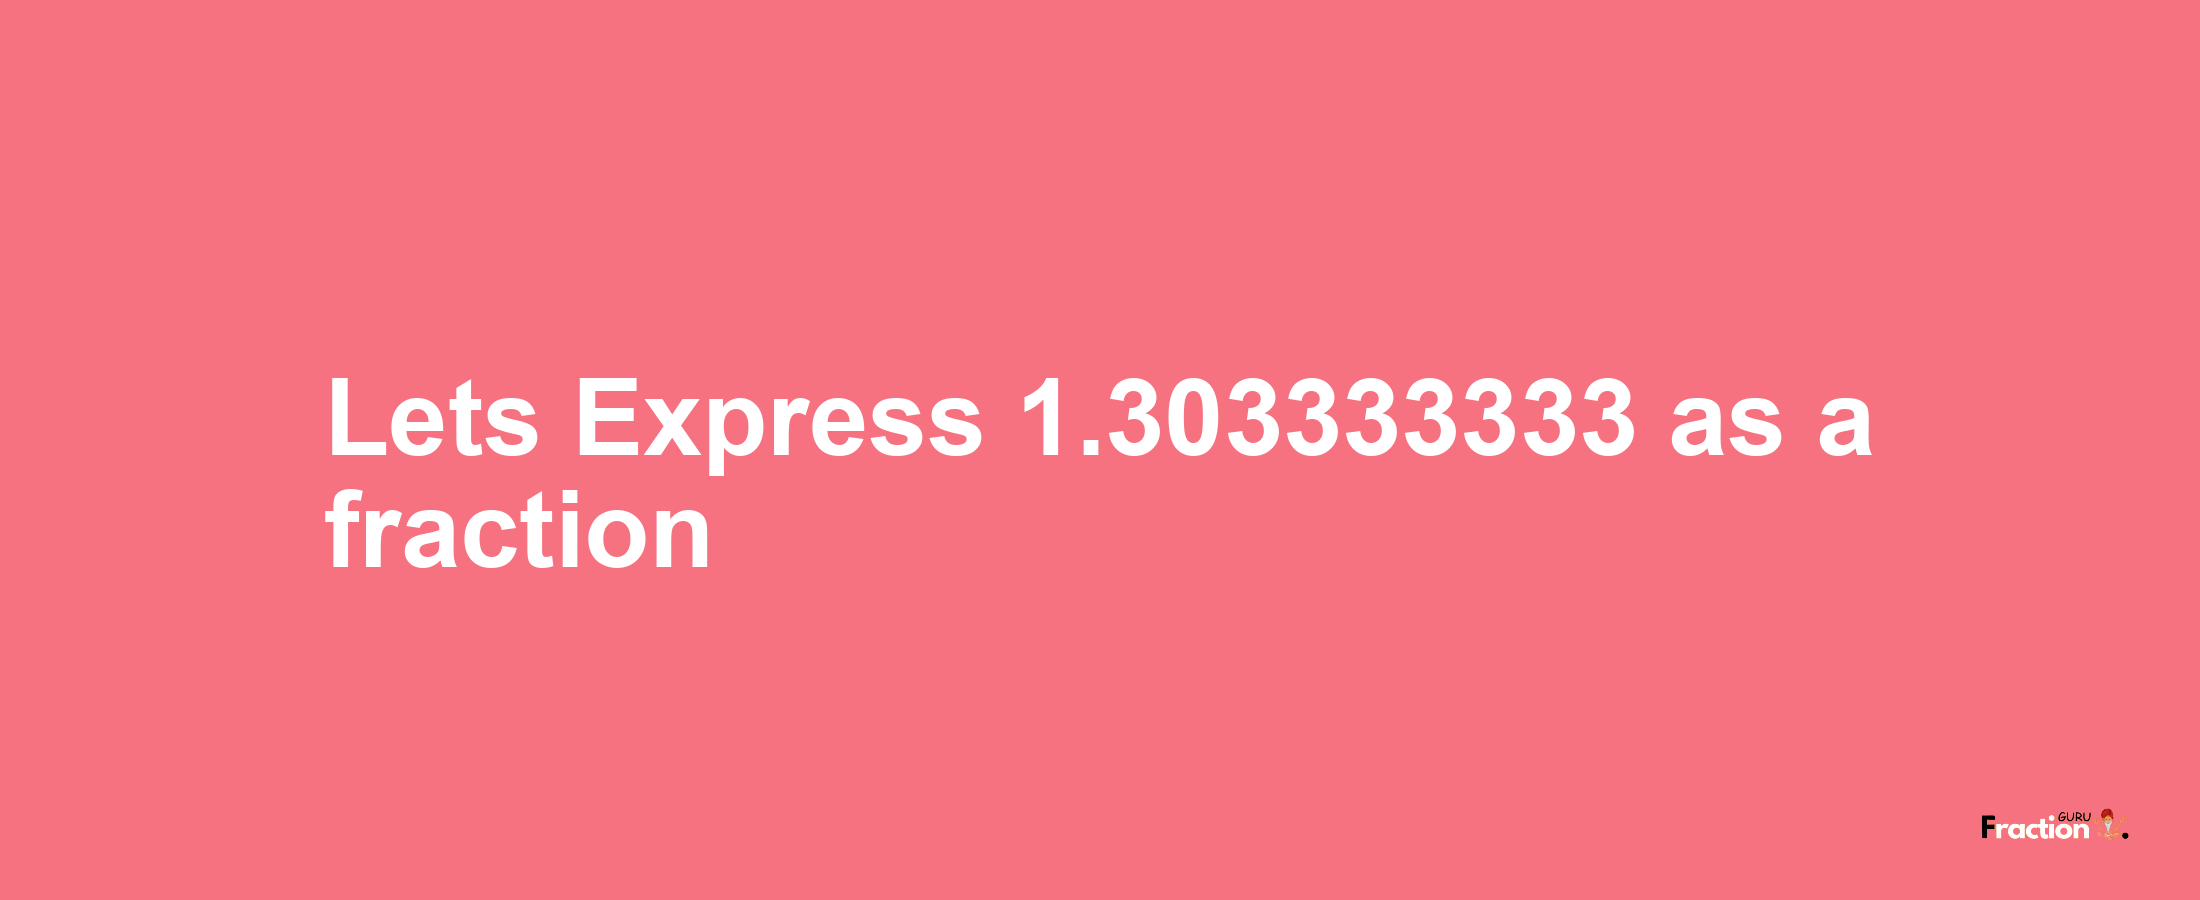 Lets Express 1.303333333 as afraction